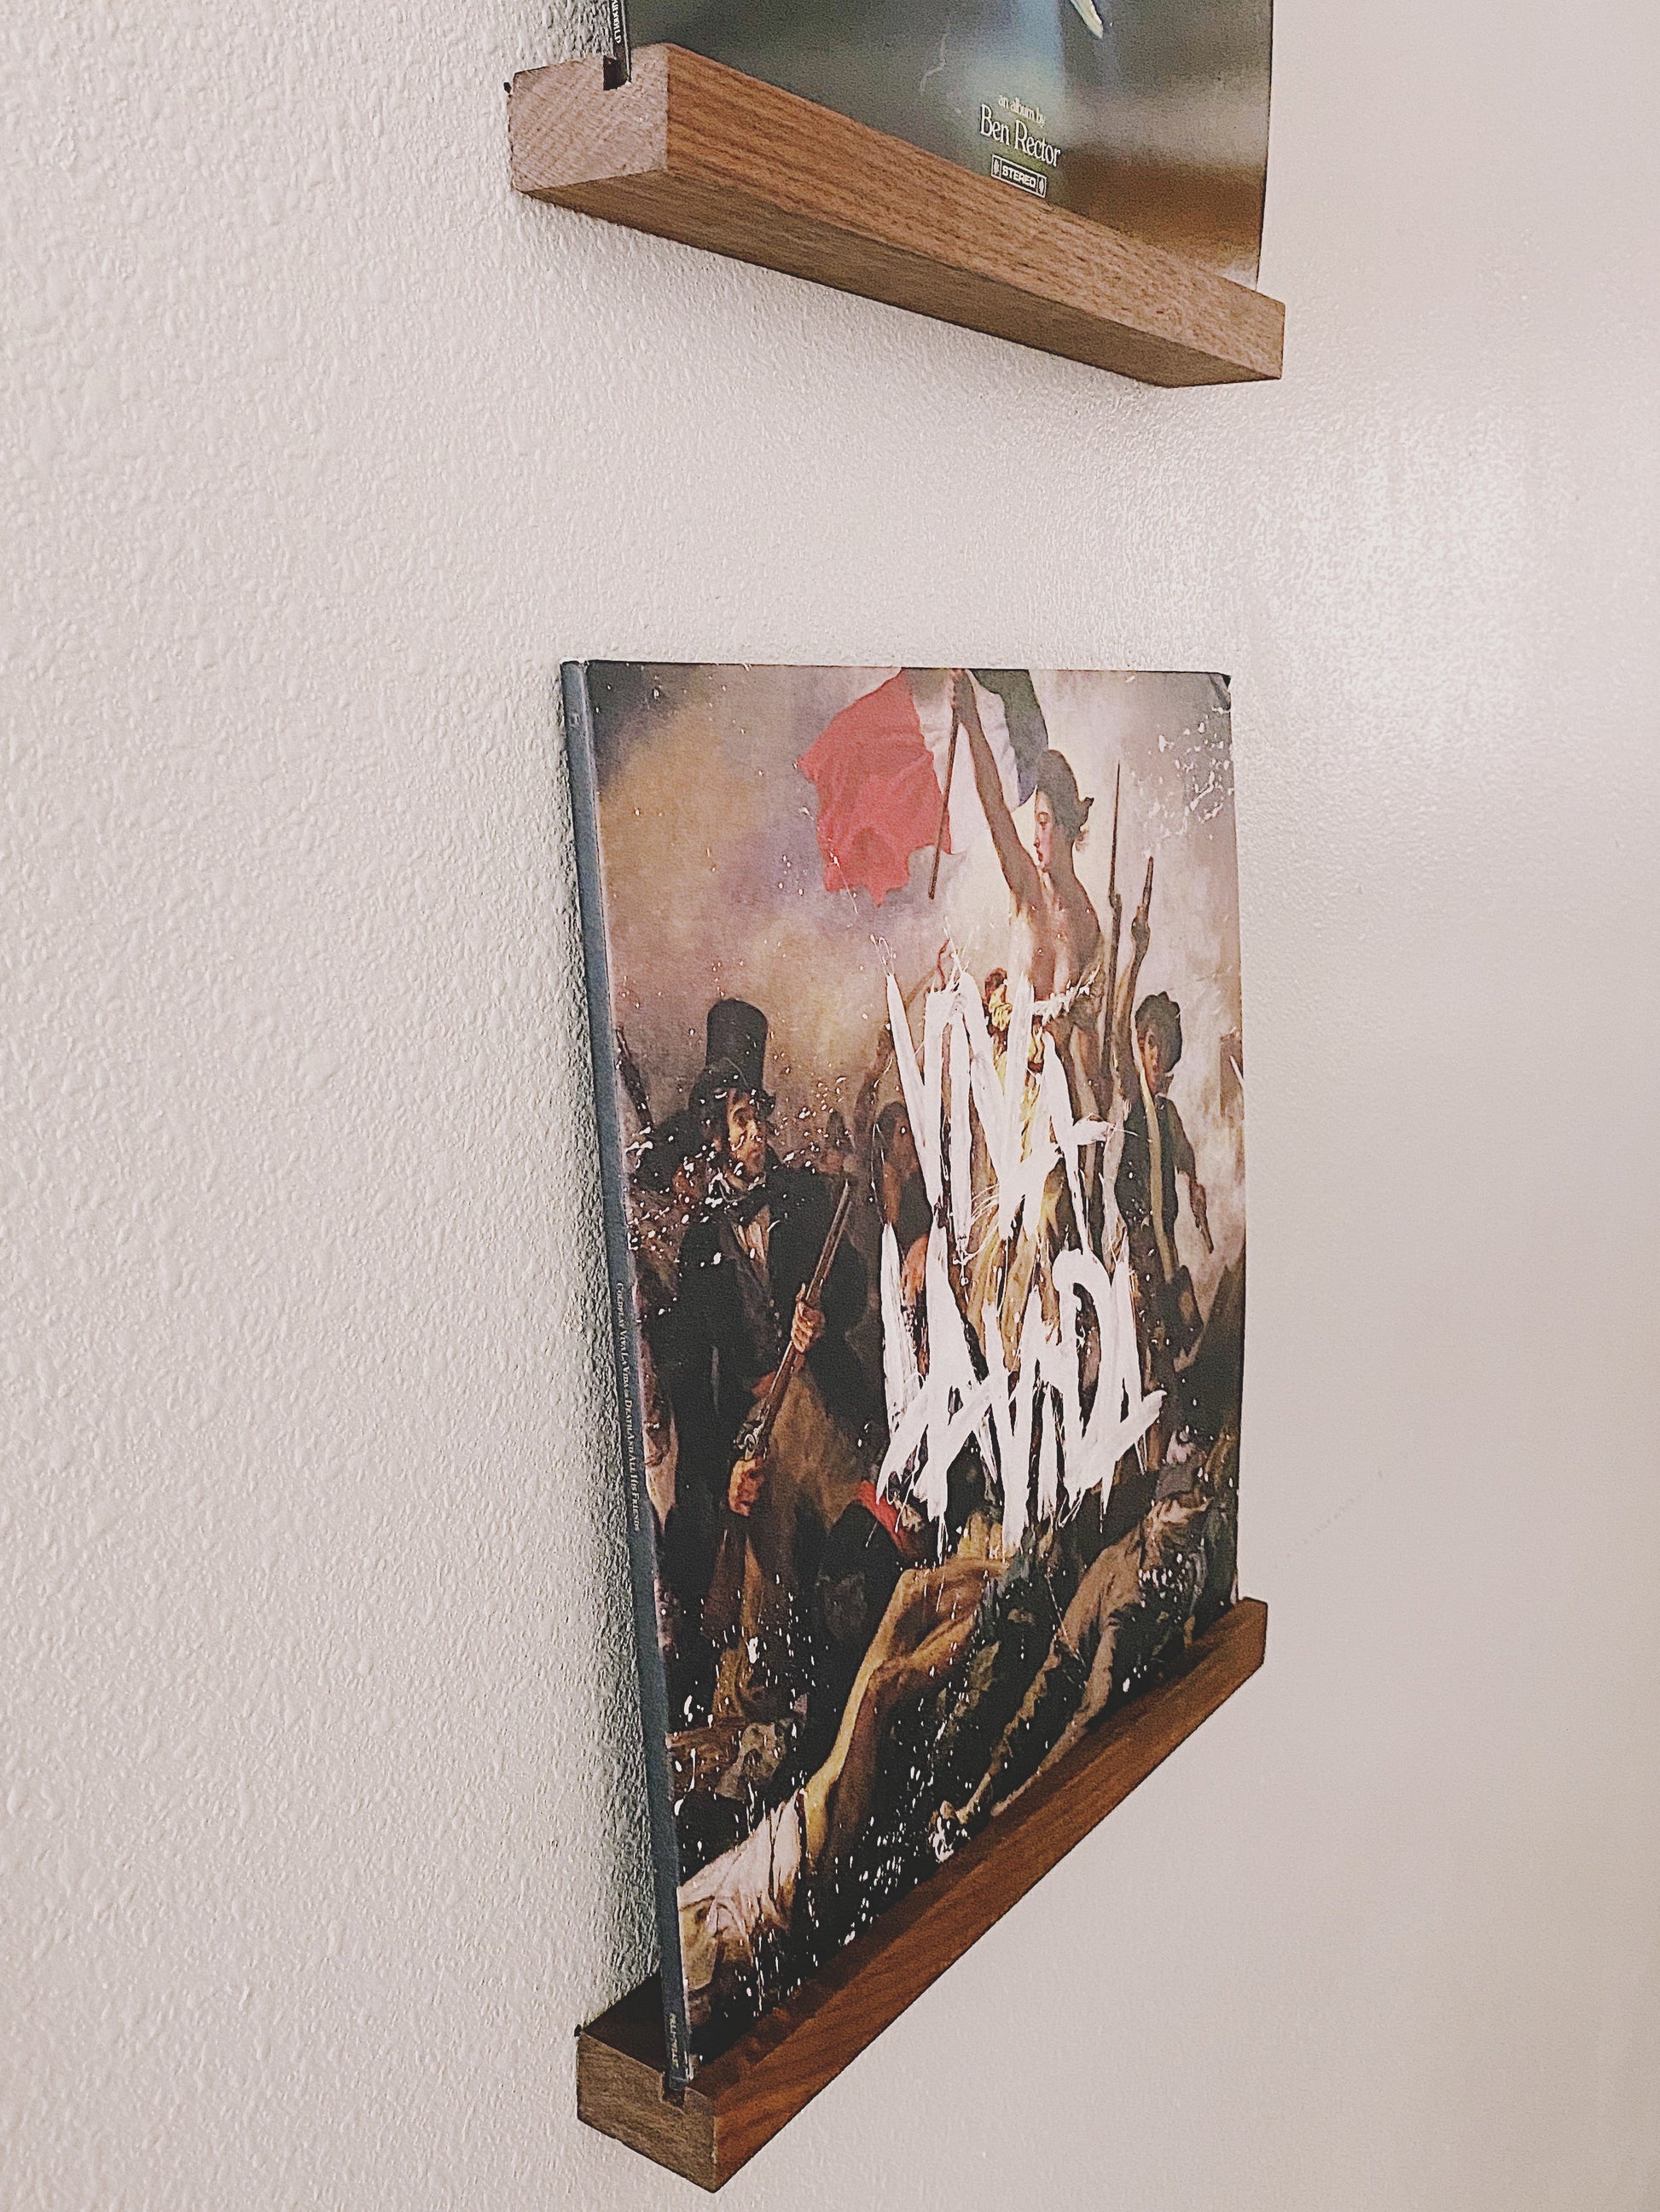 Mnke Vinyl Record Wall Mount - An Elegant Display Ledge Made from Solid Wood - This Vinyl Record Shelf Holds Single and Double LPs (Brown)